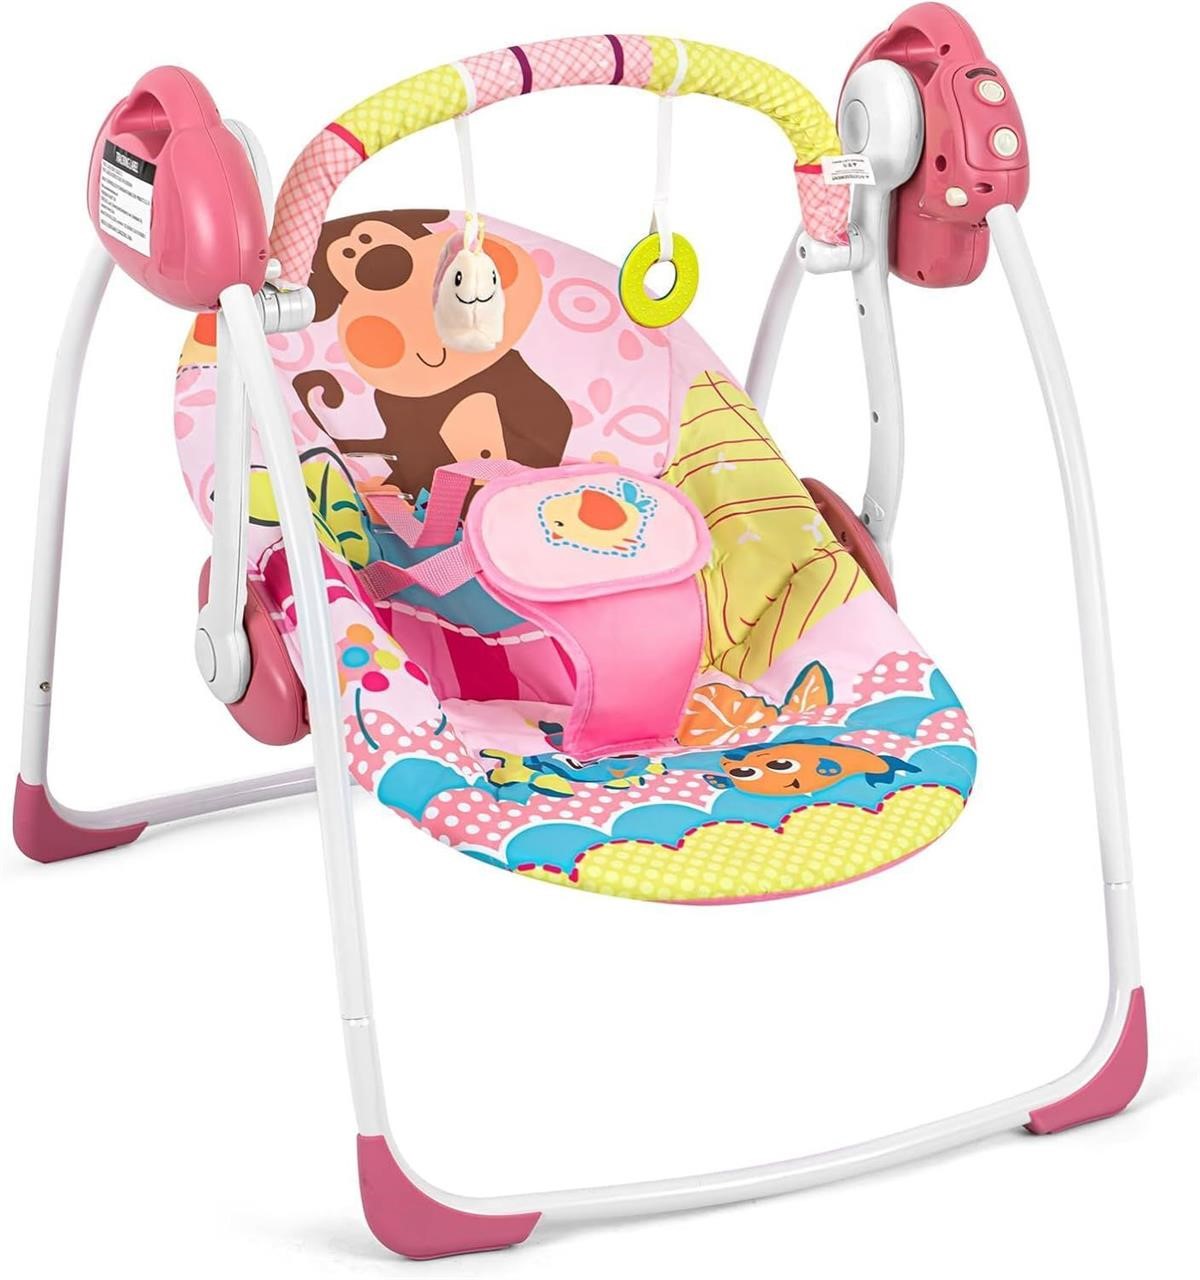 Portable Baby Swings for Infants,